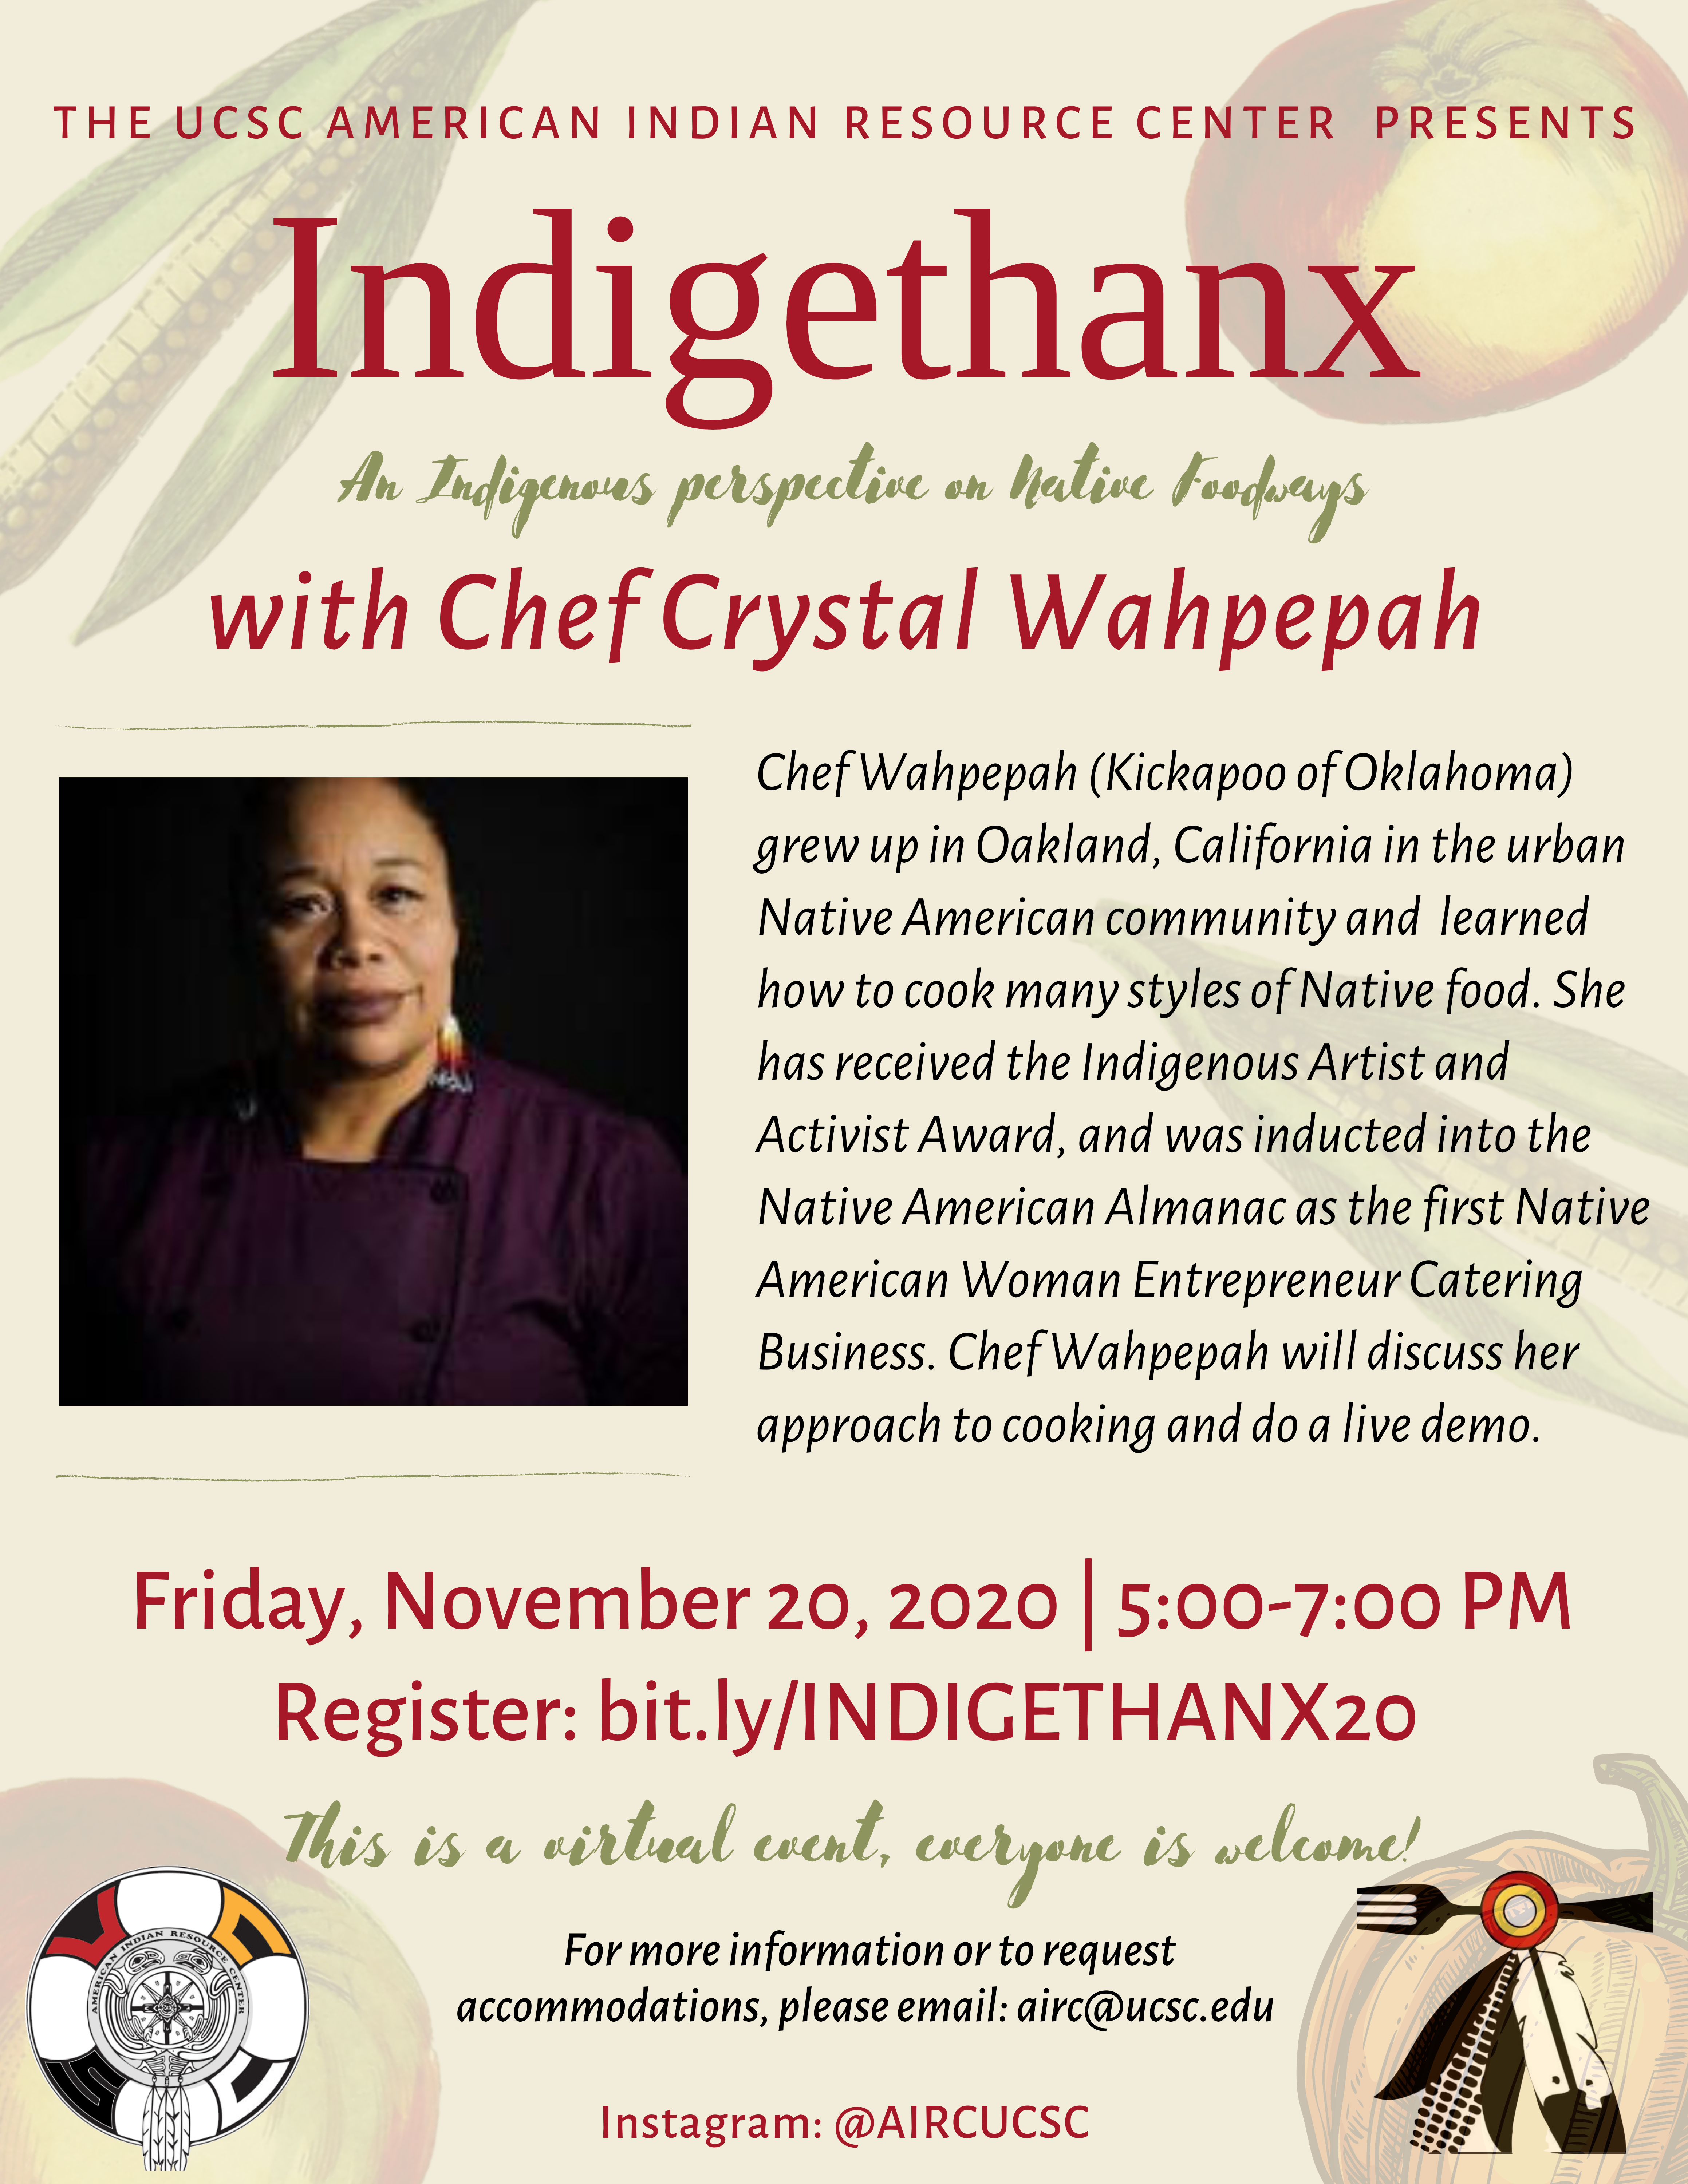 Indigethanx 2020, An Indigenous Perspective on Native Foodways with Chef Crystal Wahpepah